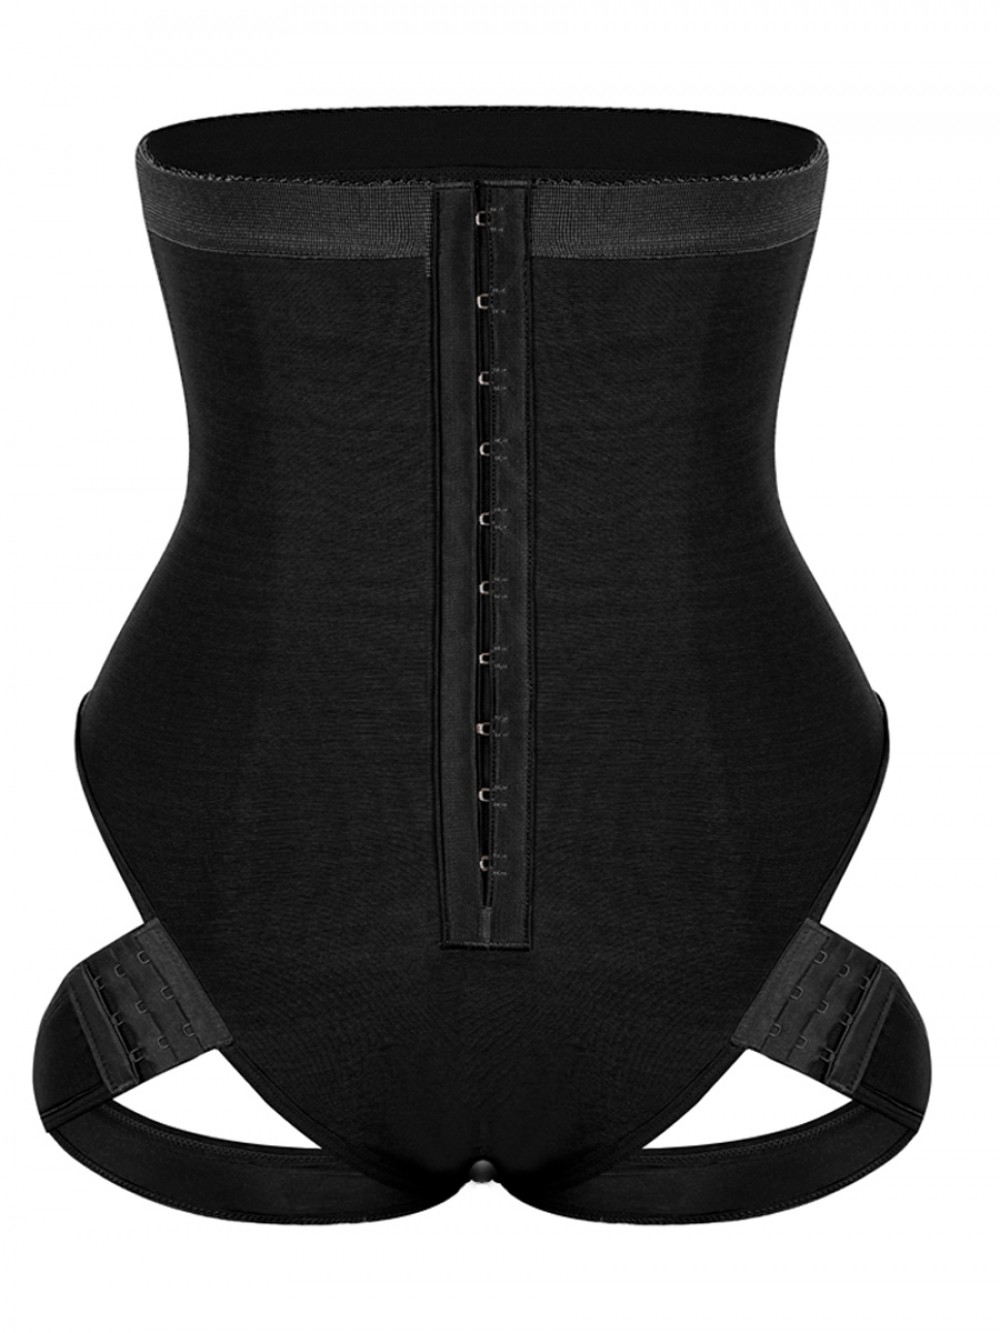 Black High Waist Butt Lifter With 2 Side Straps Good Elastic